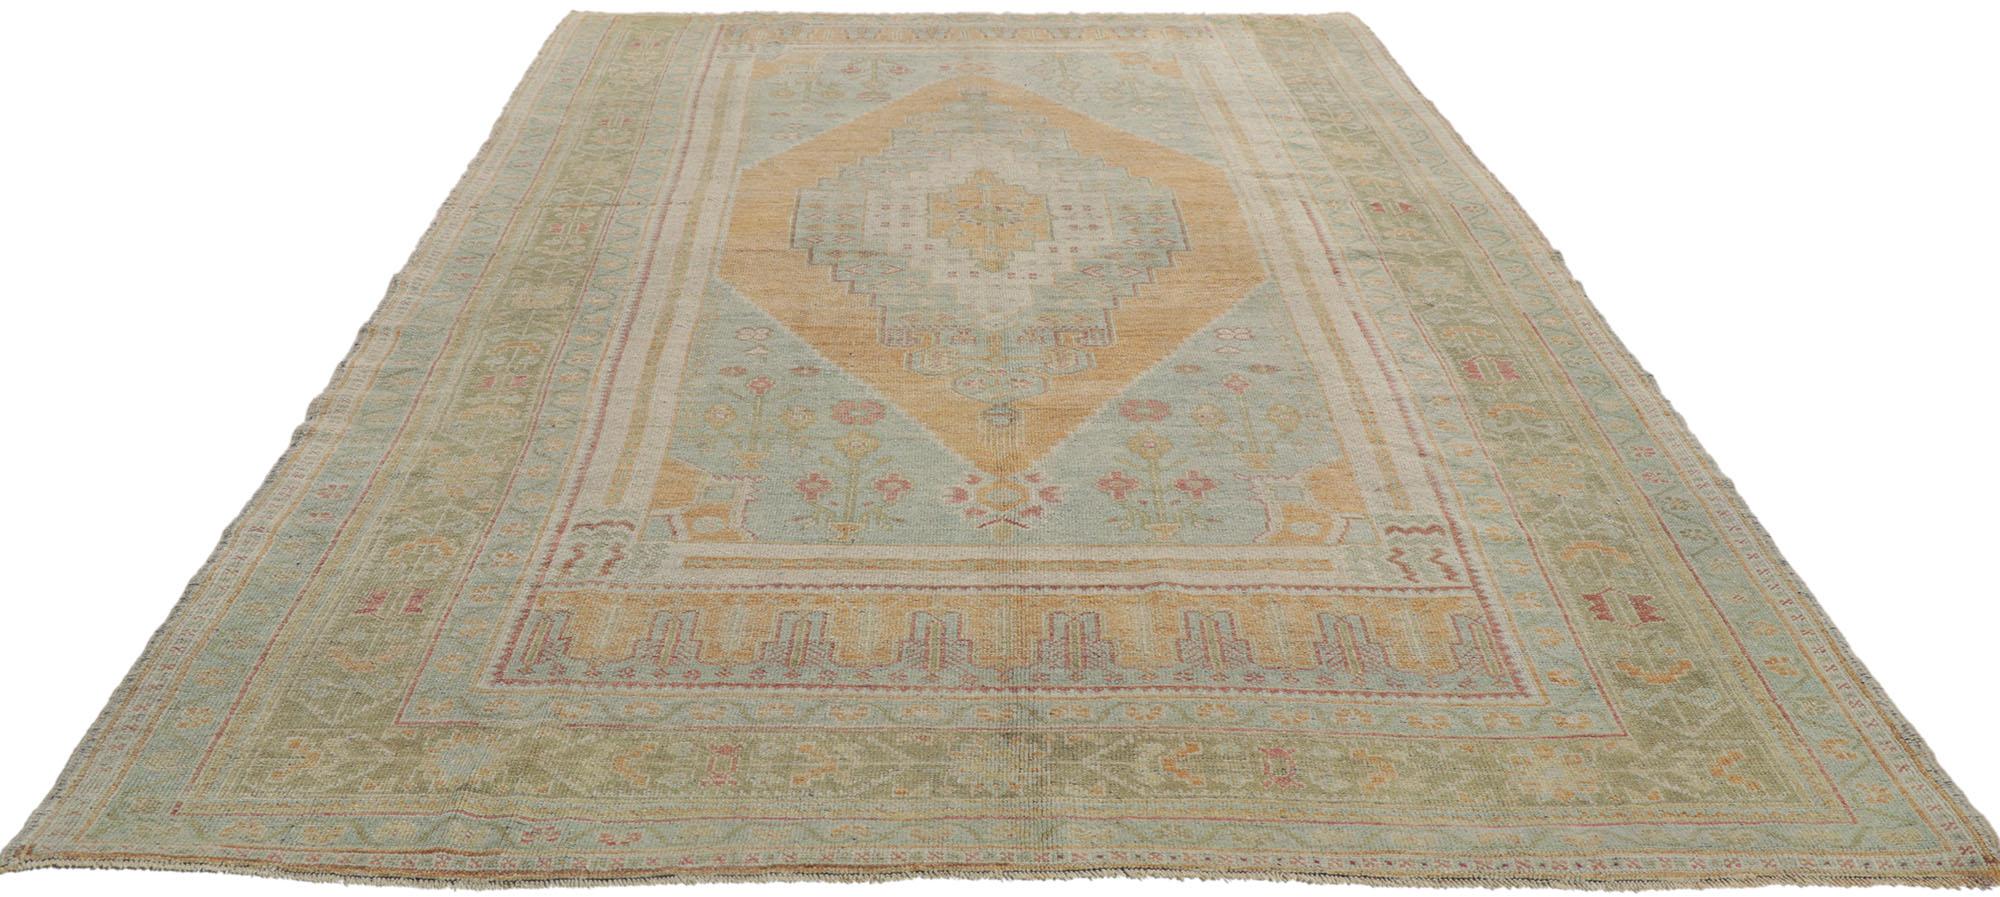 Hand-Knotted Vintage Turkish Oushak Rug Soft Earth-Tone Colors